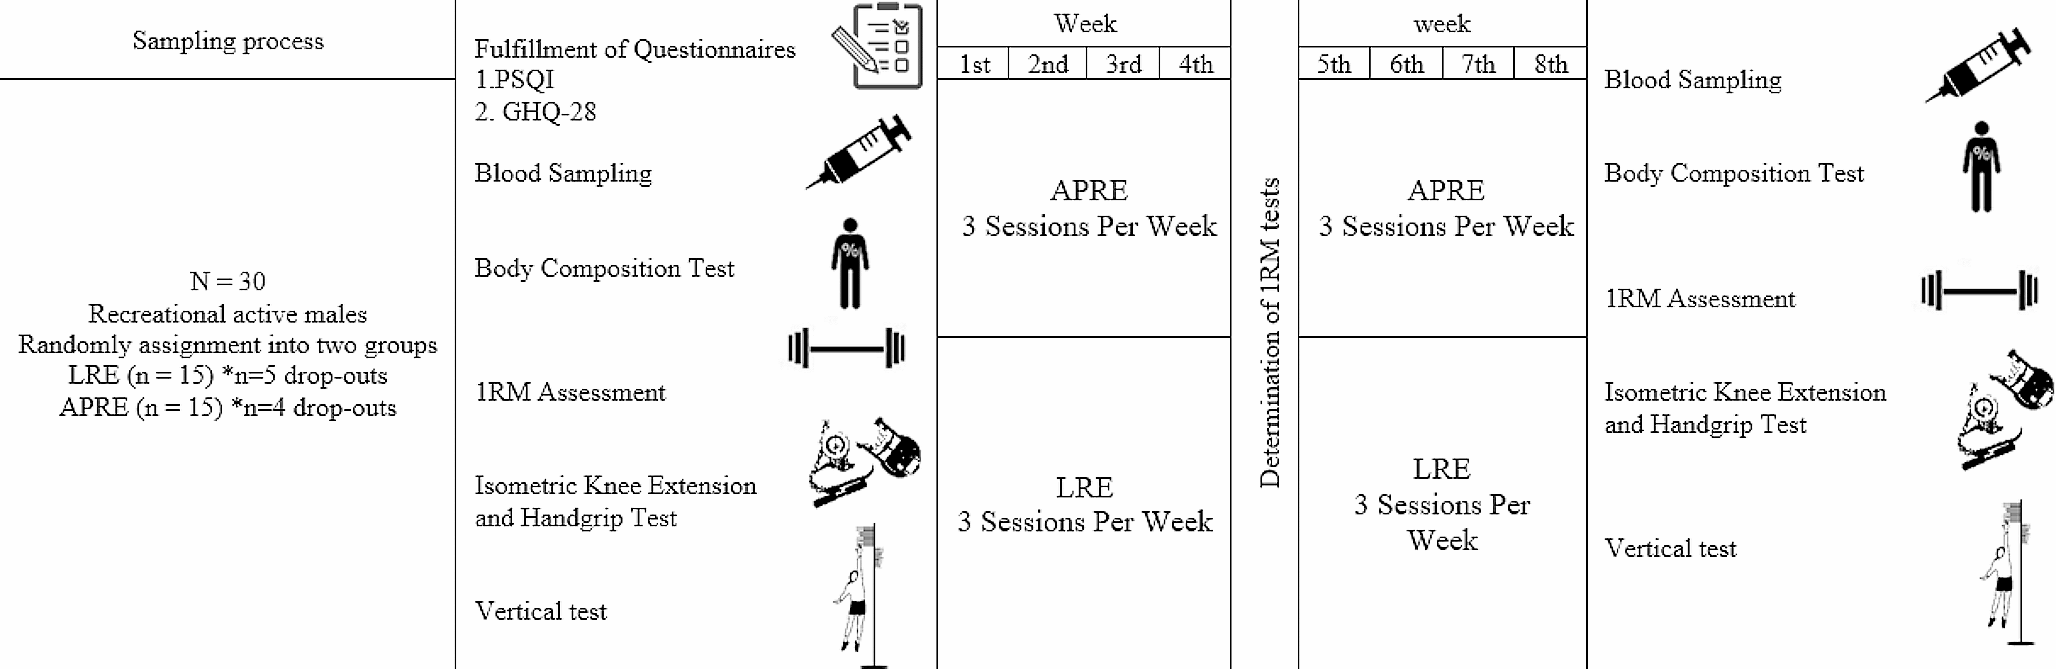 Anabolic myokine responses and muscular performance following 8 weeks of autoregulated compared to linear resistance exercise in recreationally active males